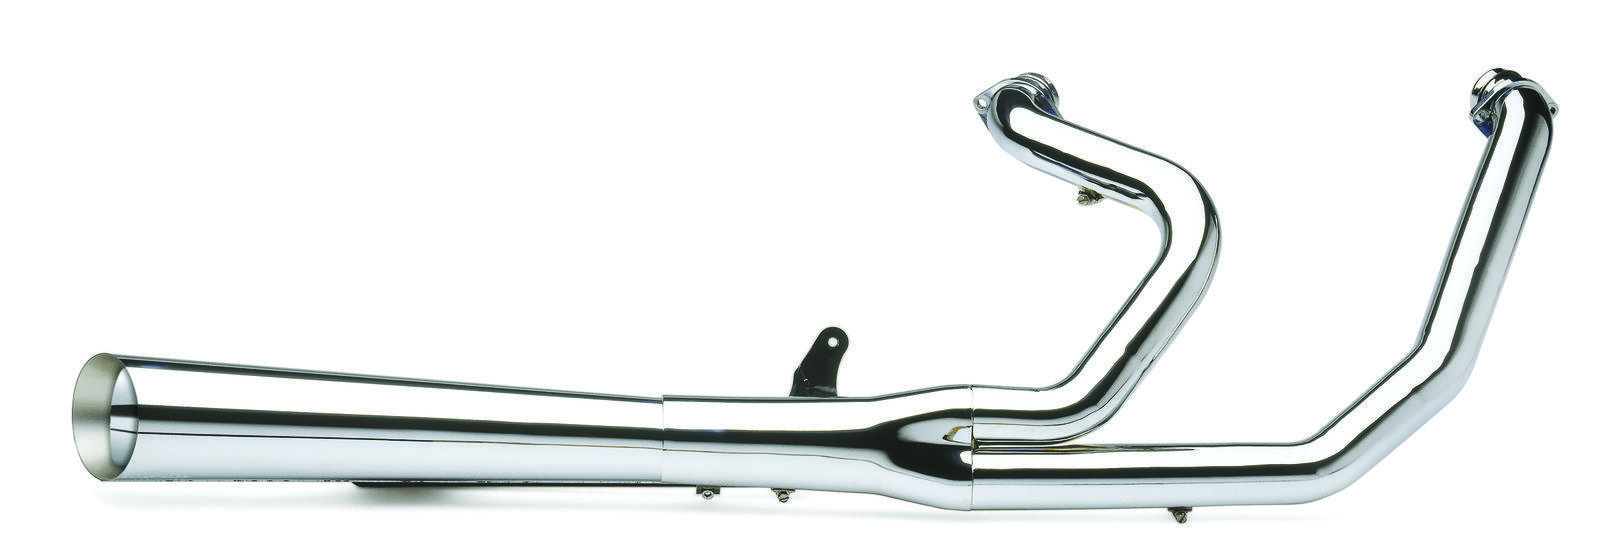 Supermeg 2-1 Chrome Exhaust System - For 12-16 Harley Davidson Softail - Click Image to Close